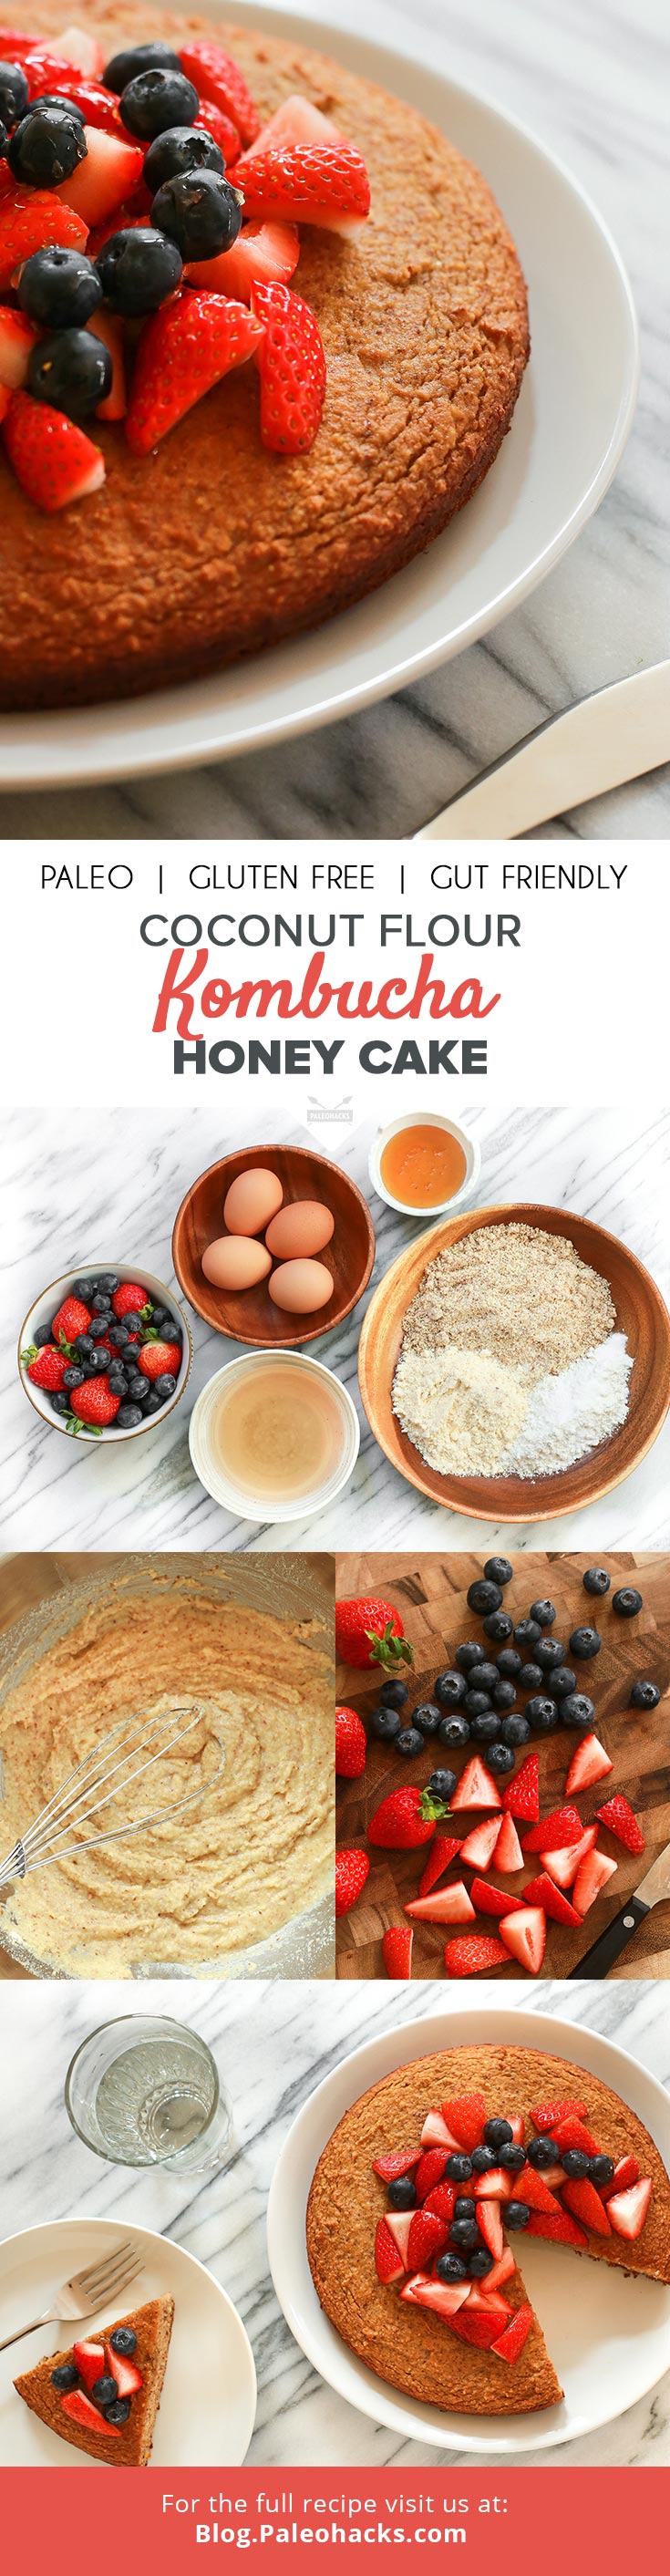 Dig into this sweet kombucha cake topped with fresh berries and honey for a Paleo-friendly dessert.